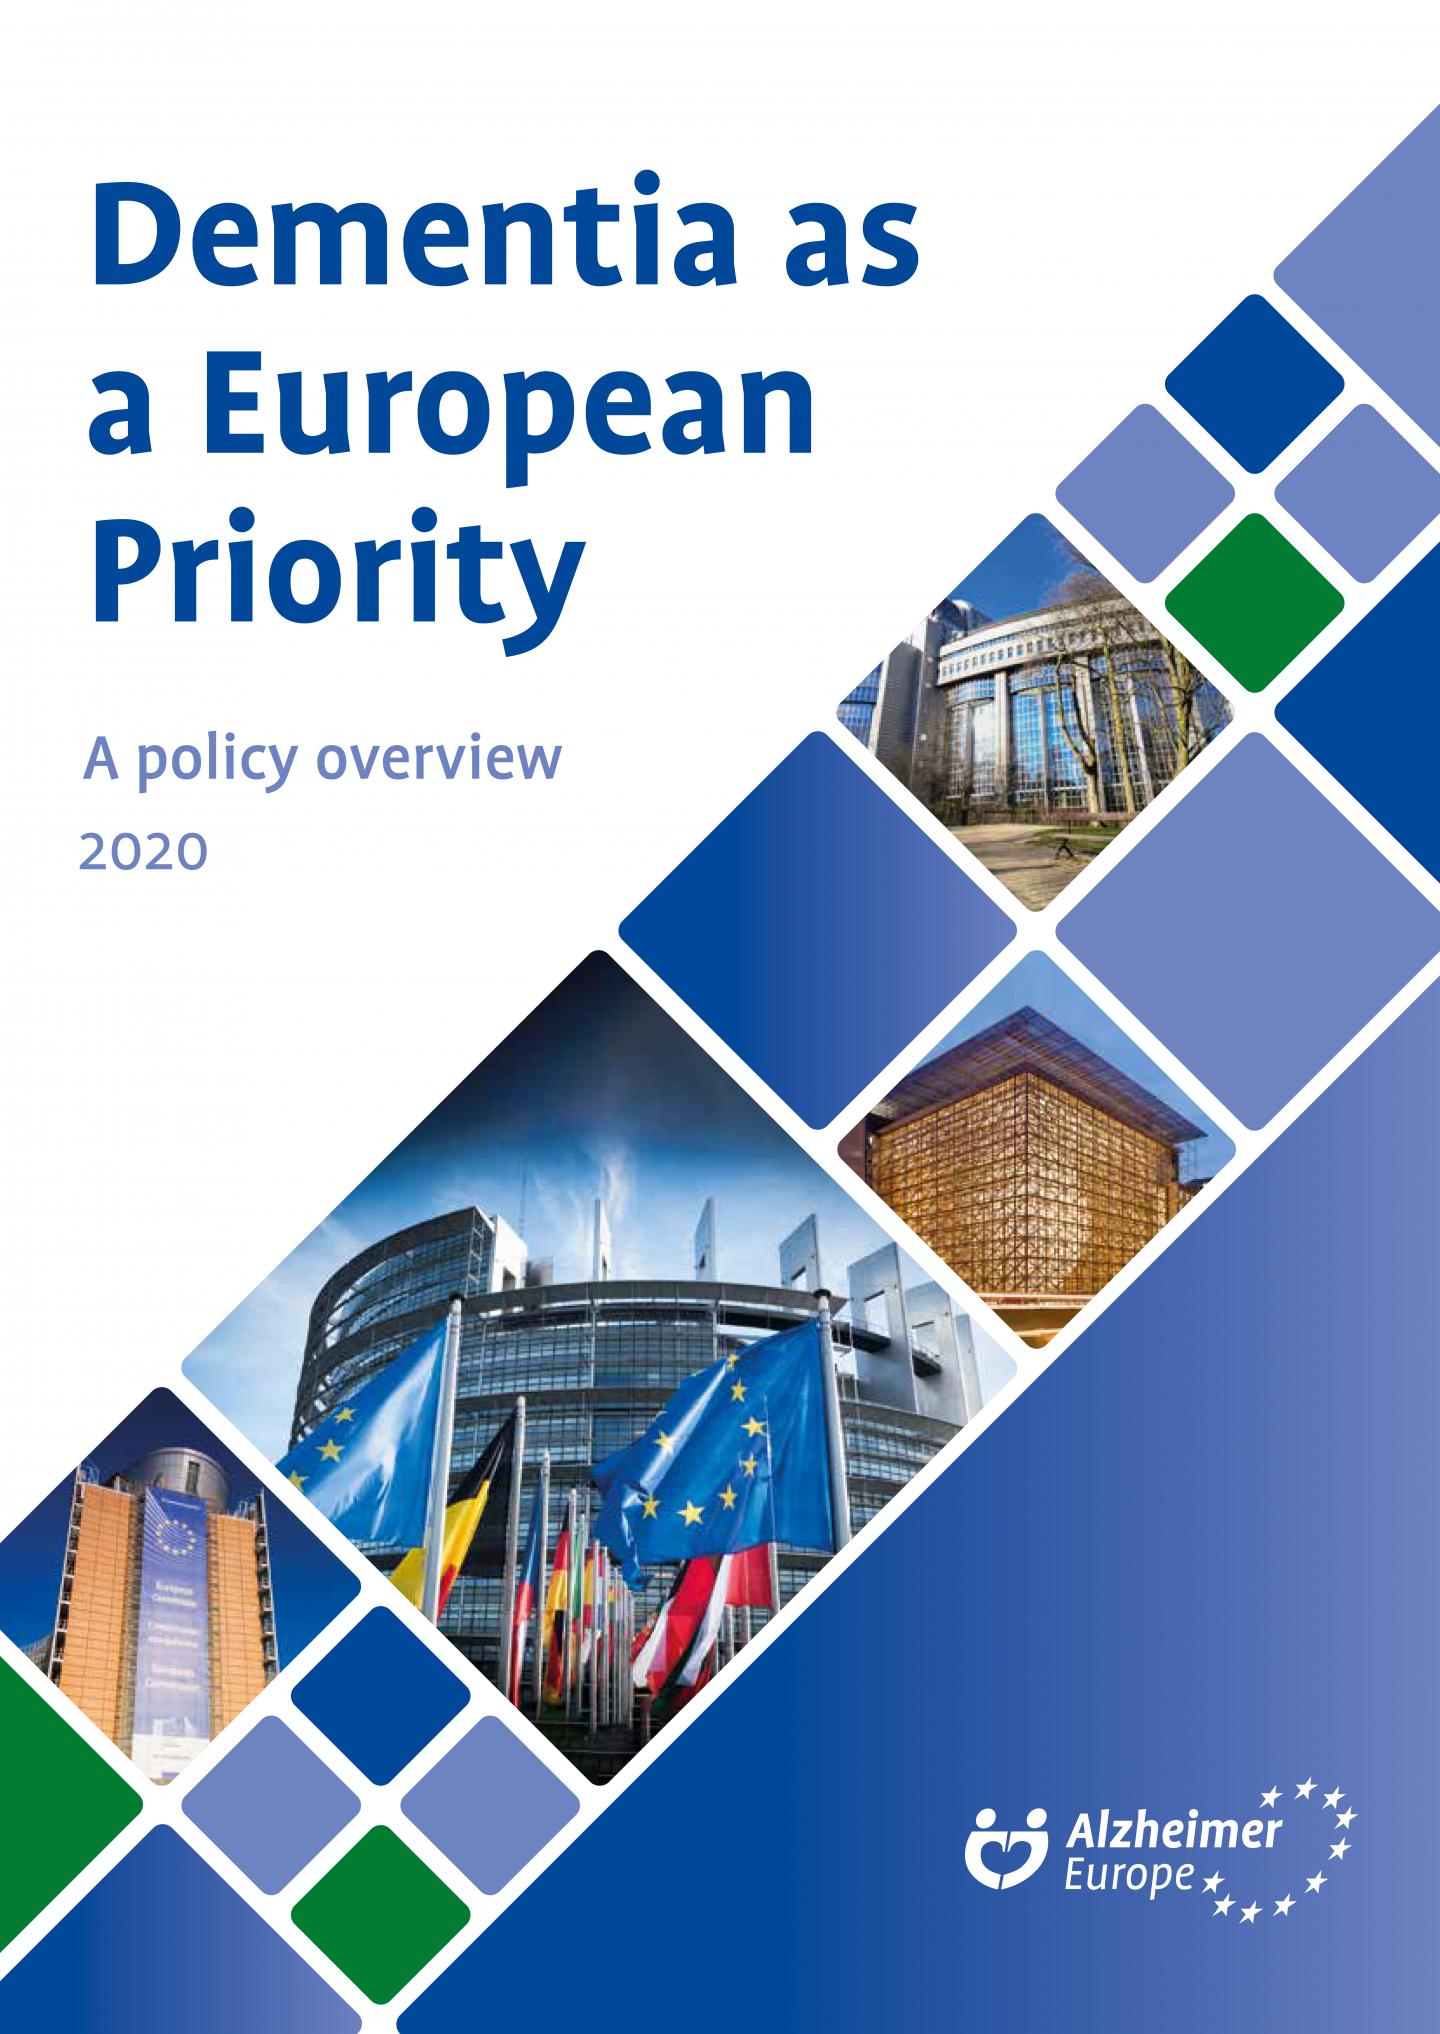 Dementia as a European Priority - A Policy Overview